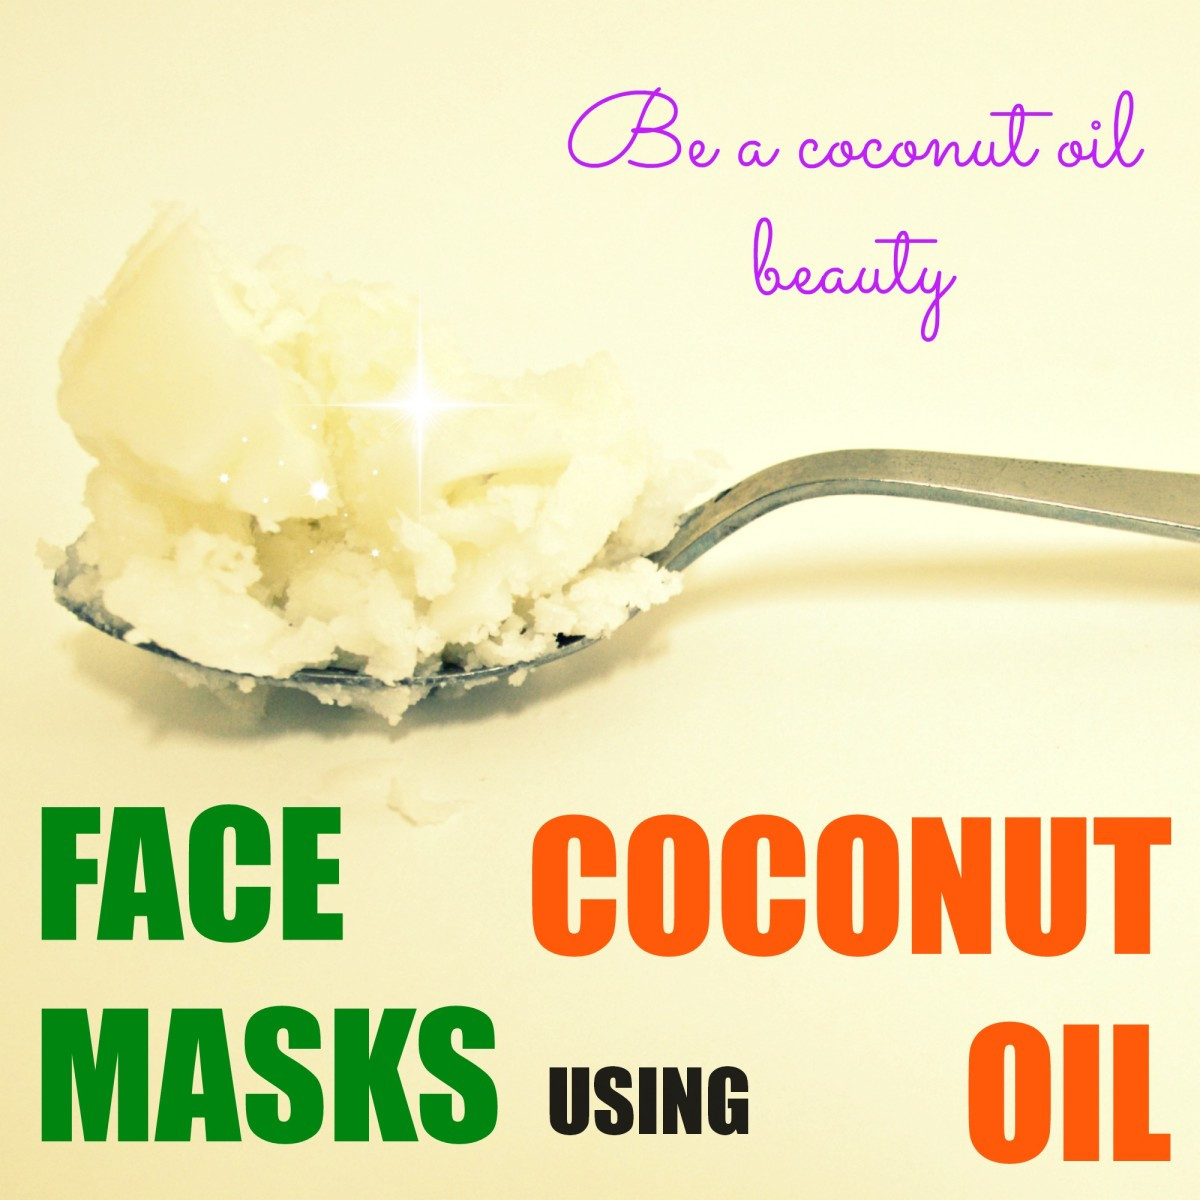 DIY Coconut Oil Face Mask
 Top Three Coconut Oil Face Mask Recipes for Healthy Skin